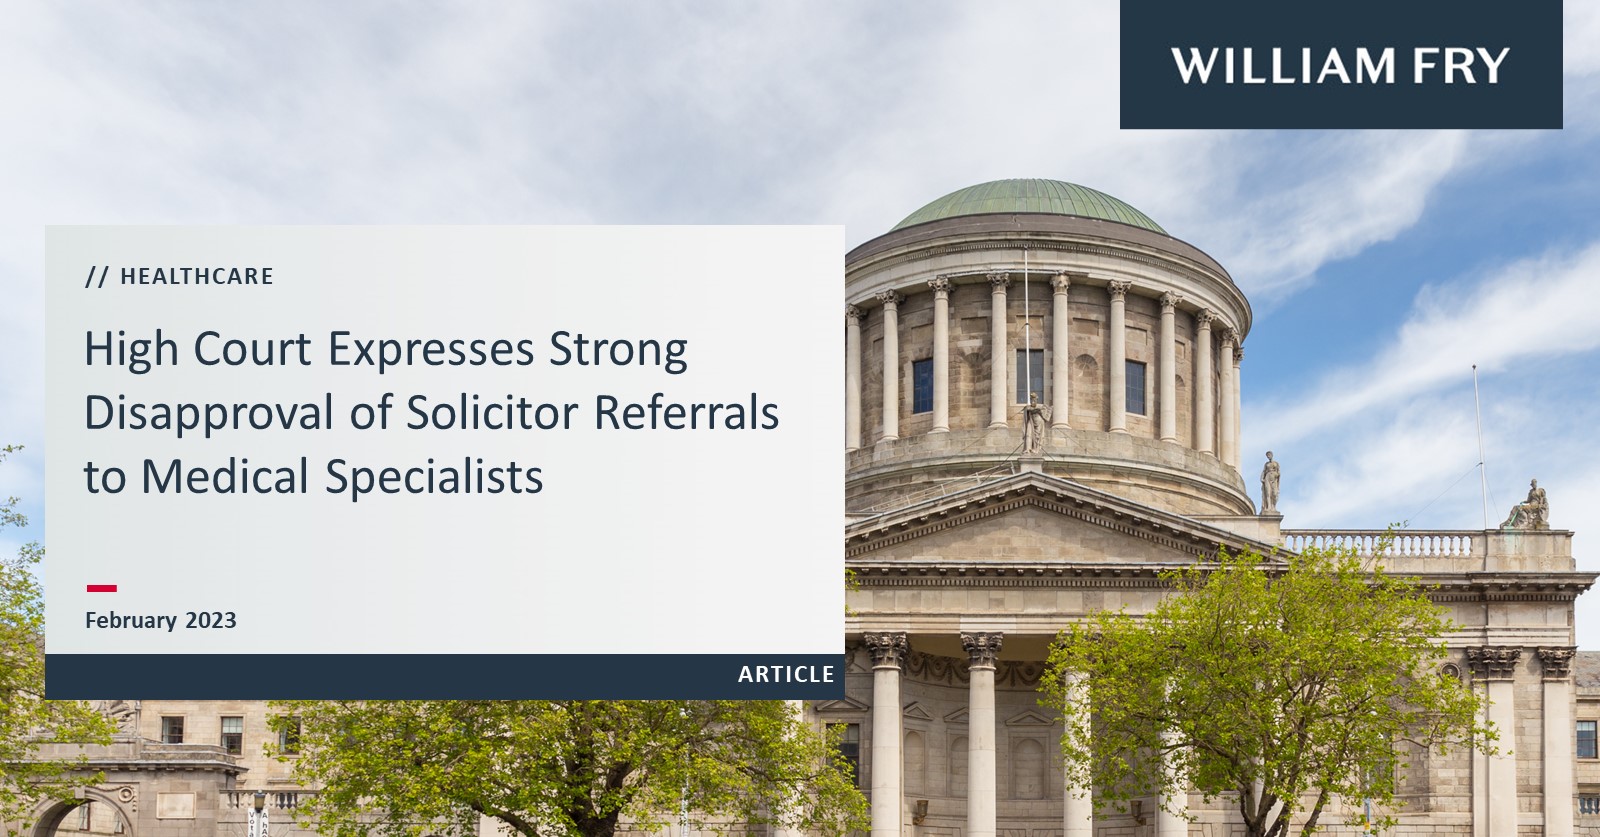 High Court Expresses Strong Disapproval of Solicitor Referrals to Medical Specialists